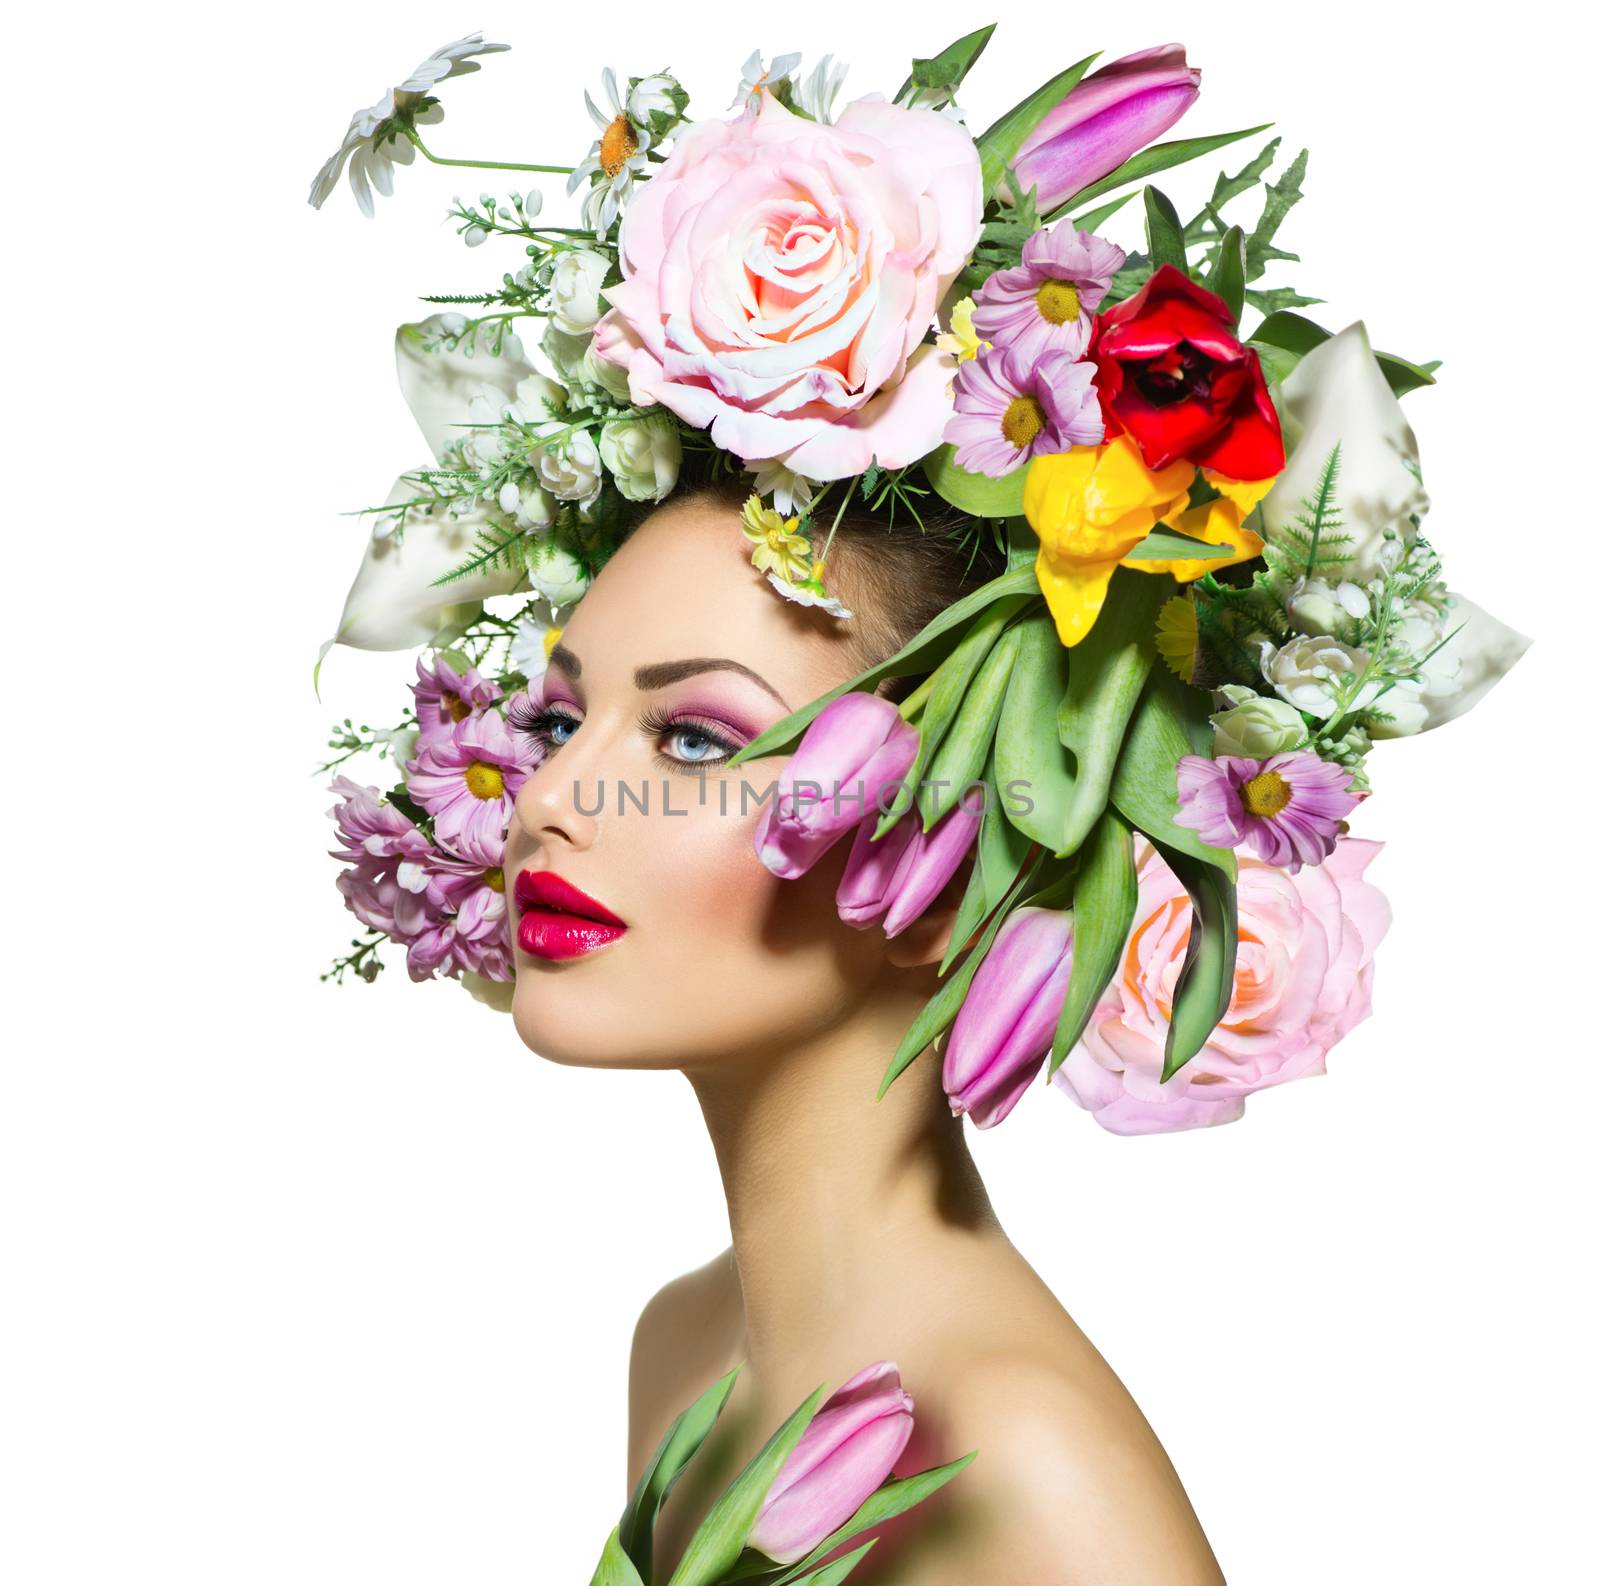 Beauty Spring Girl with Flowers Hair Style by SubbotinaA